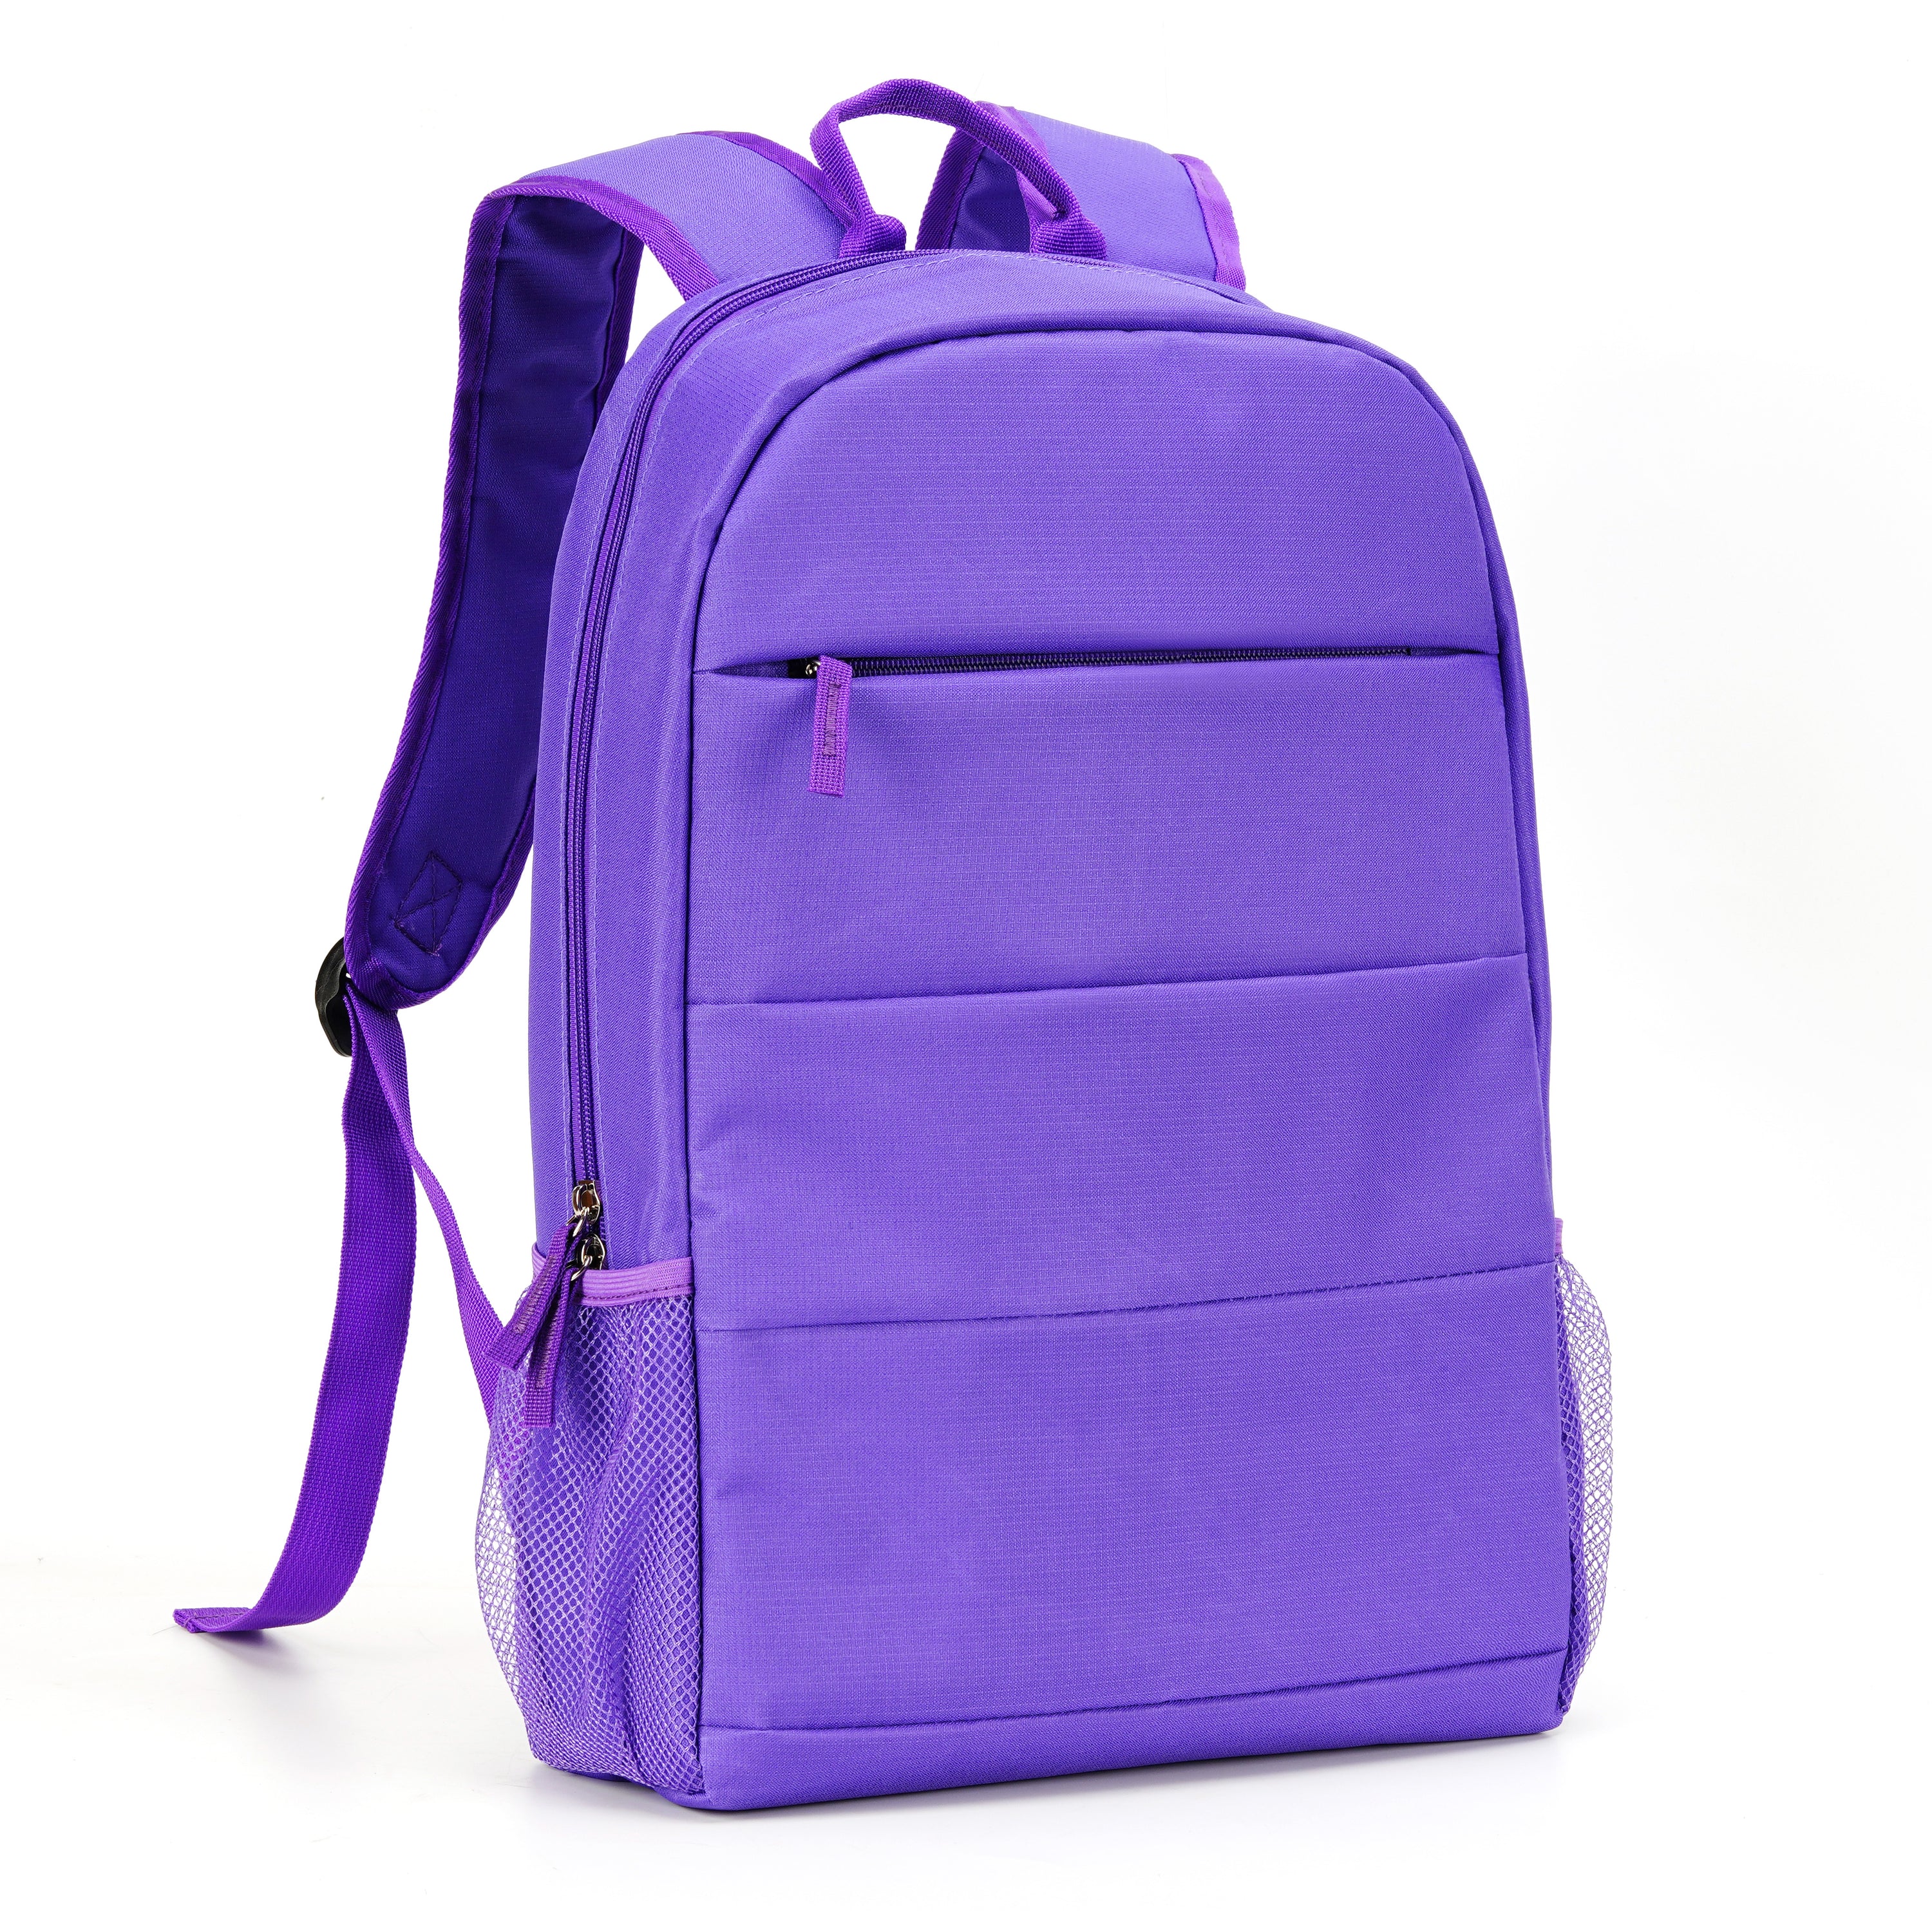 Laptop Backpack - Padded Section Holds Up To 15.6